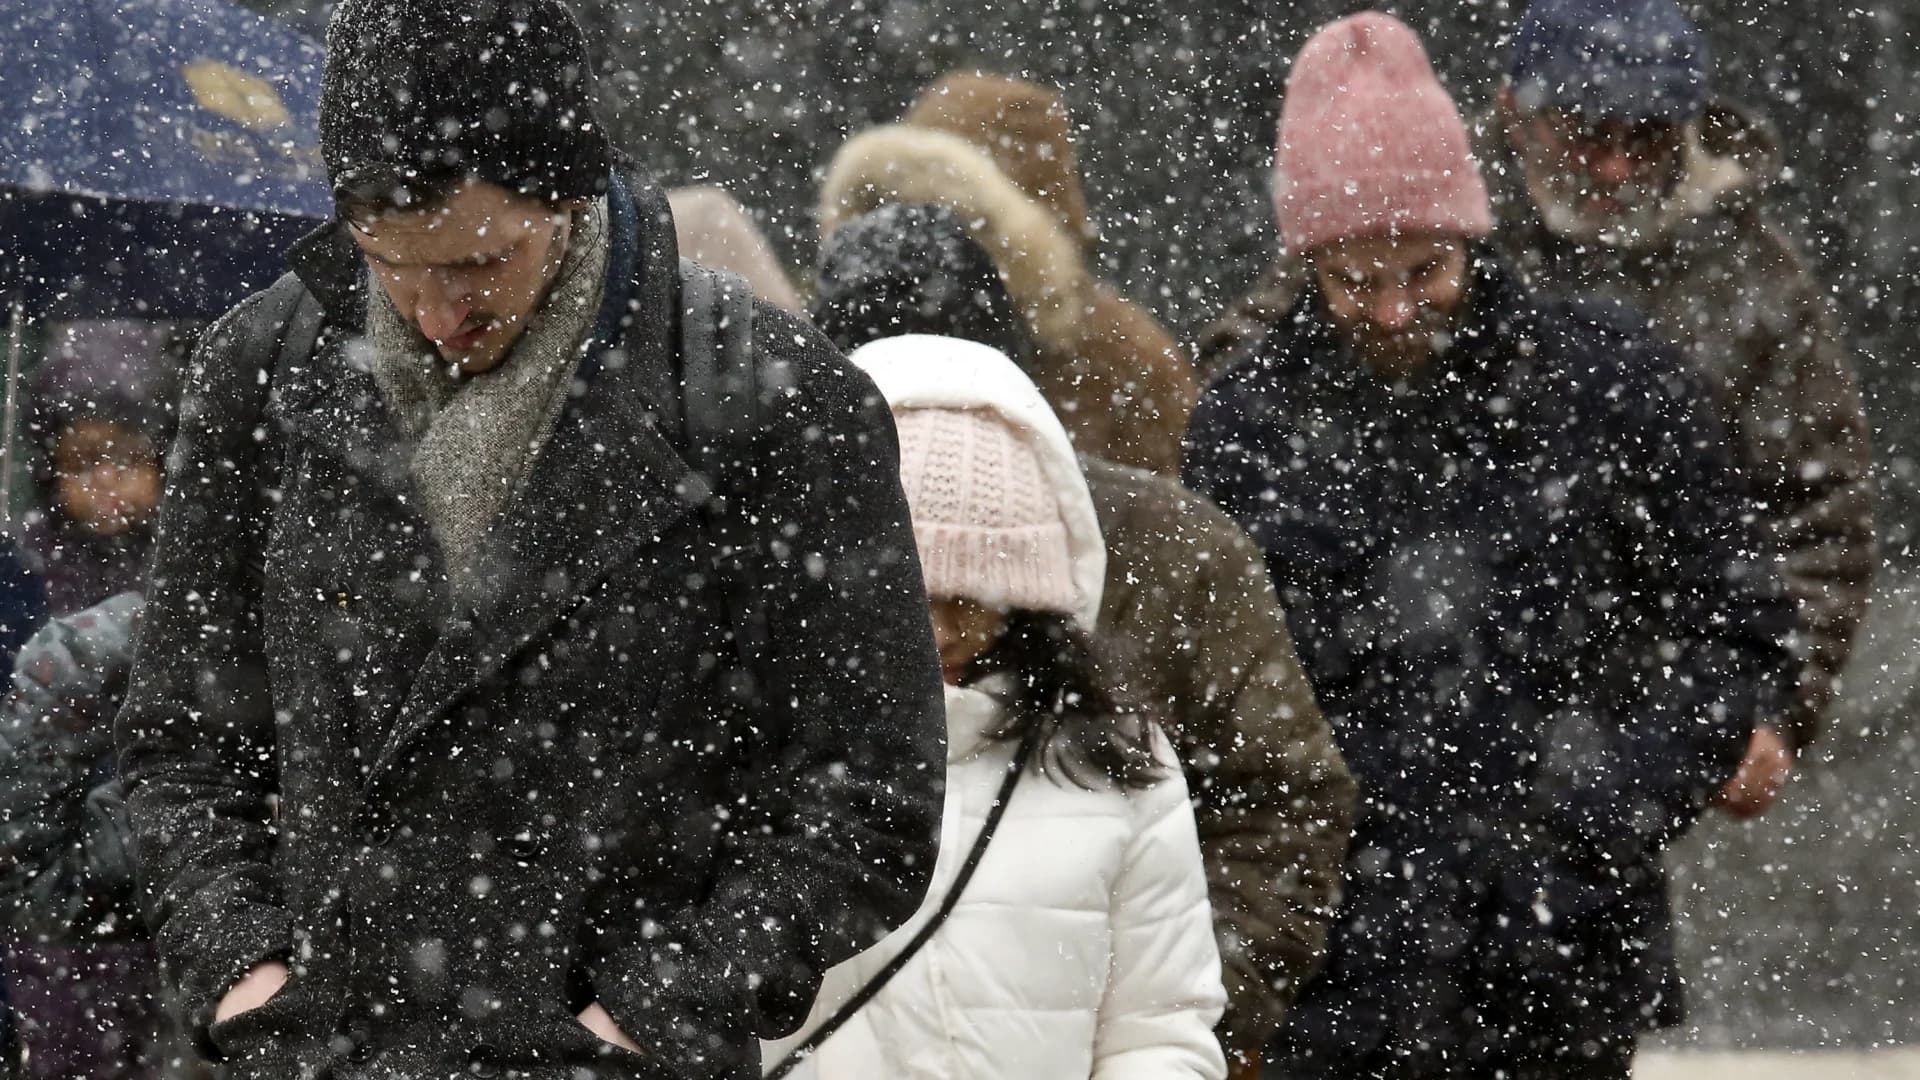 LIVE UPDATES: Tri-state area cleans up, deals with freezing temps after nor'easter